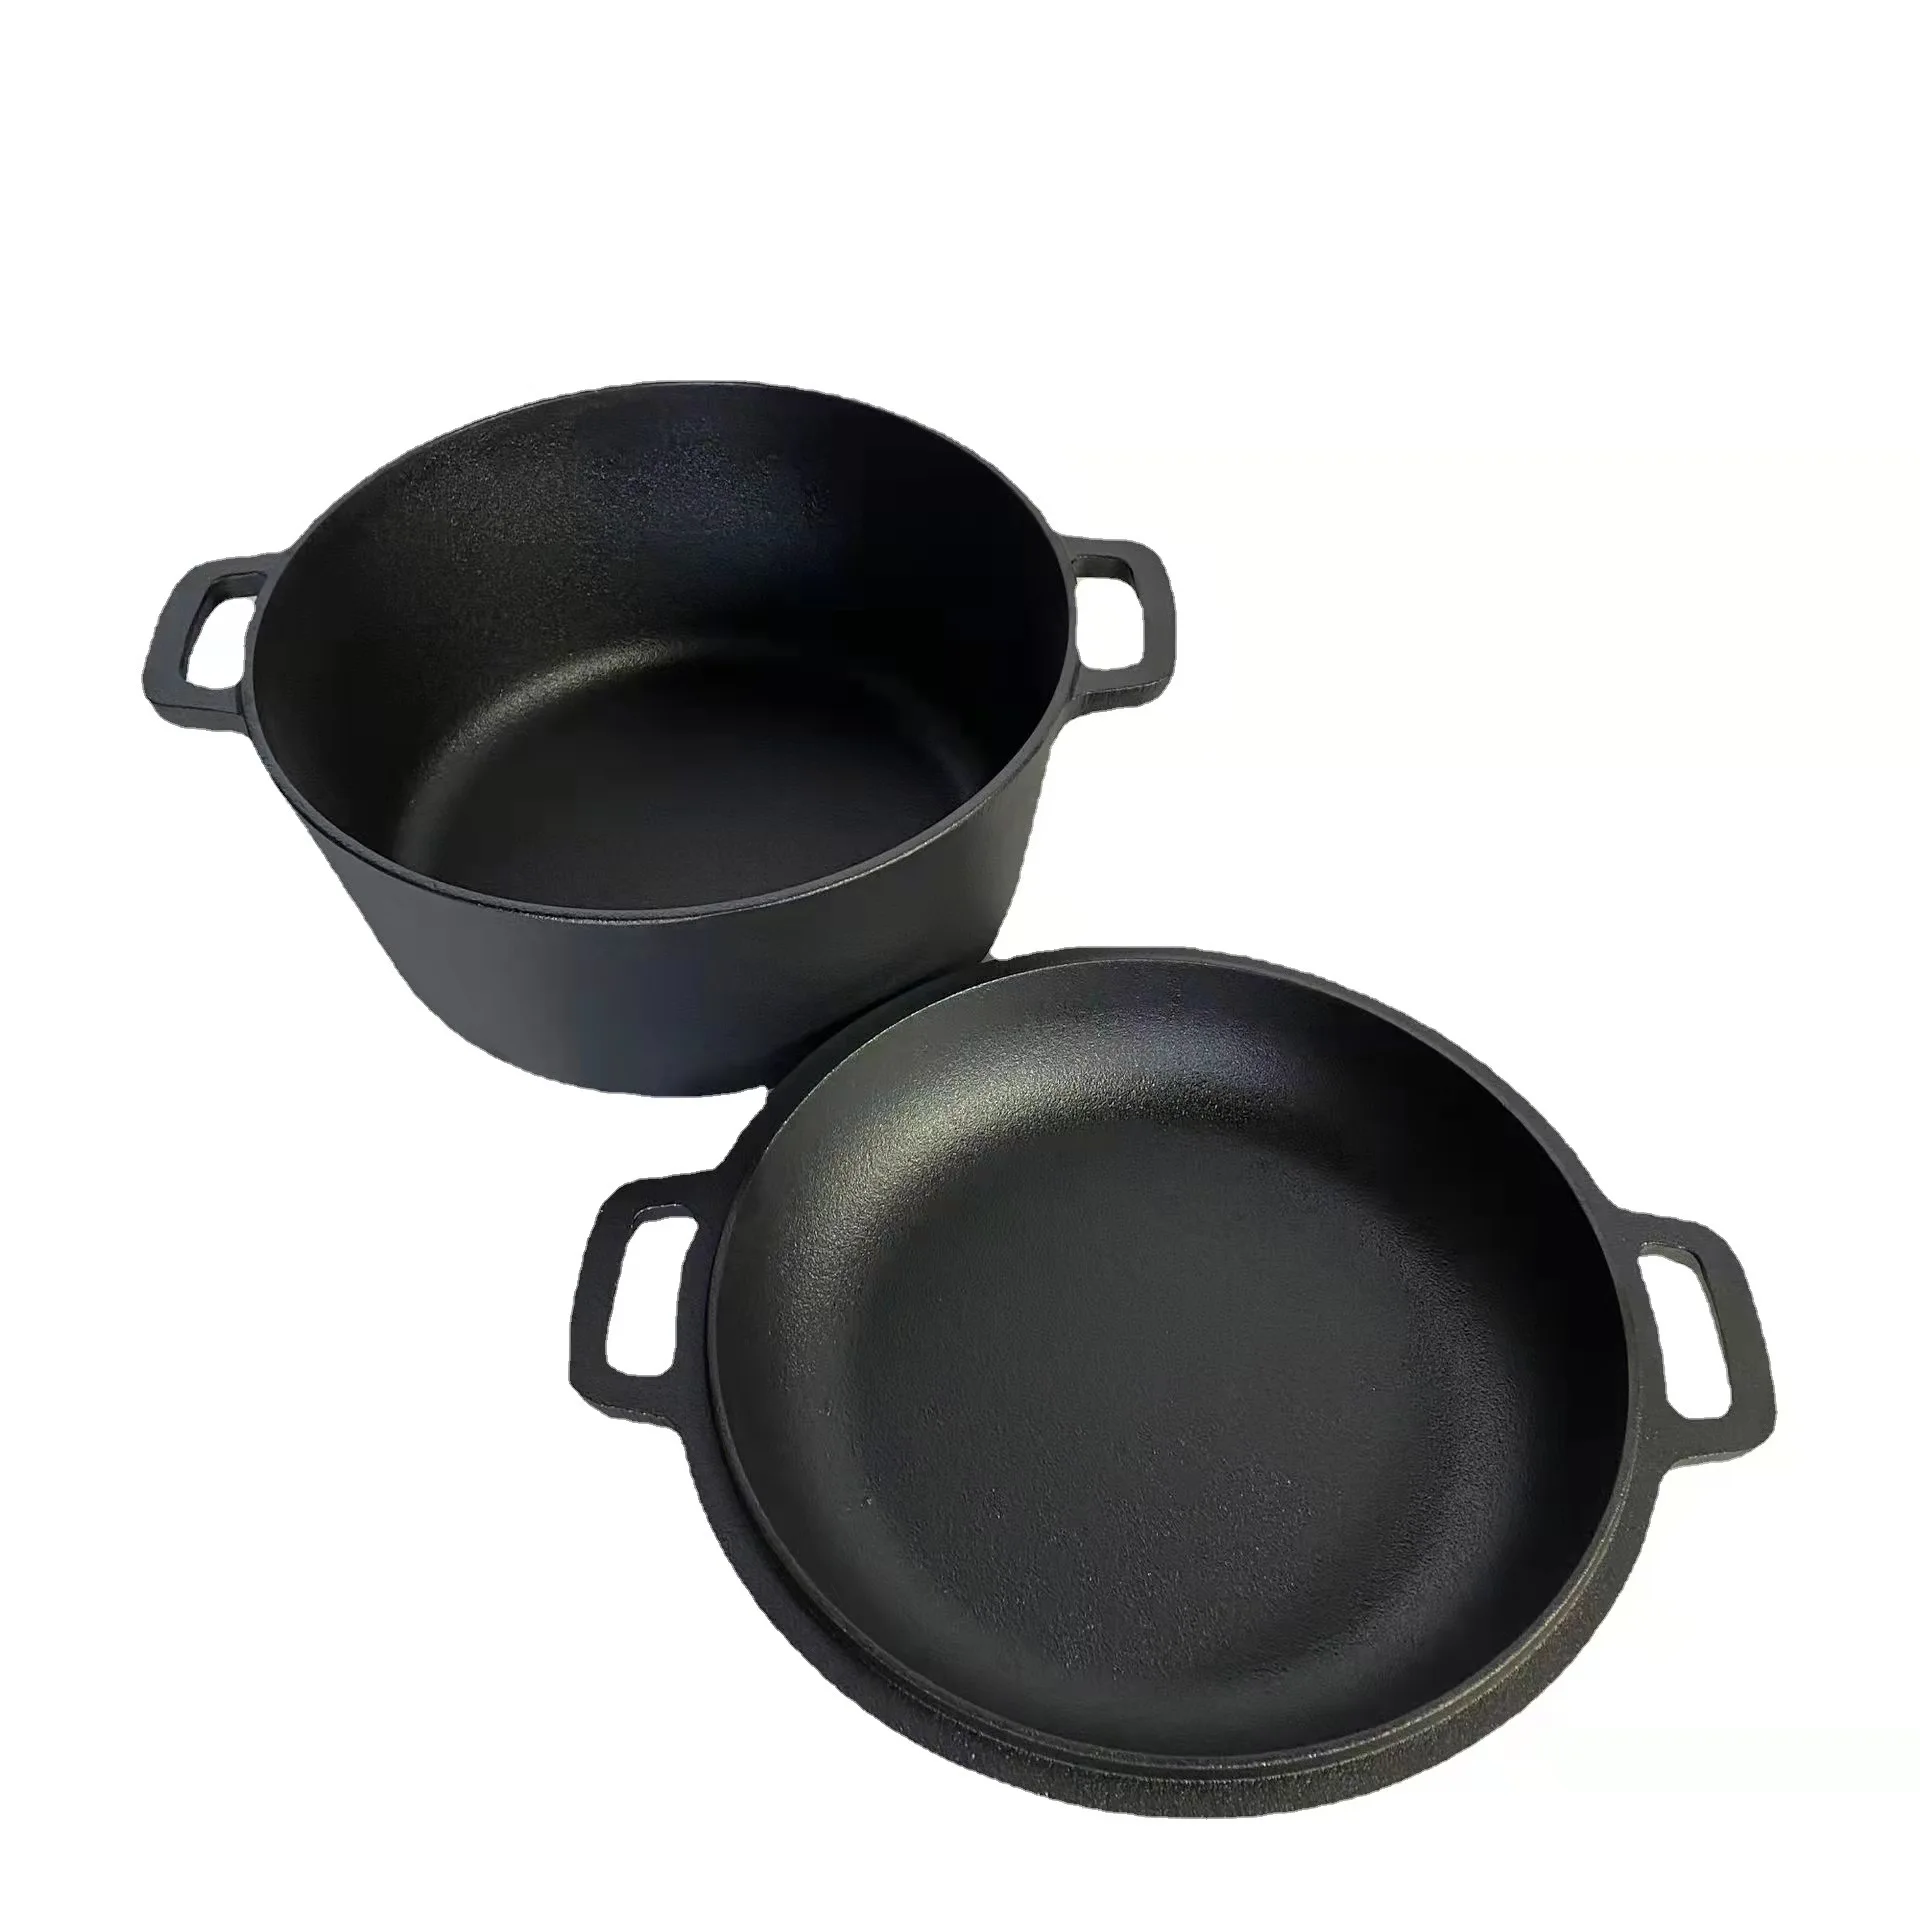 cooking pots chefmate Pre-seasoned double-purpose cast iron casserole with cast iron fry pan lid dutch oven